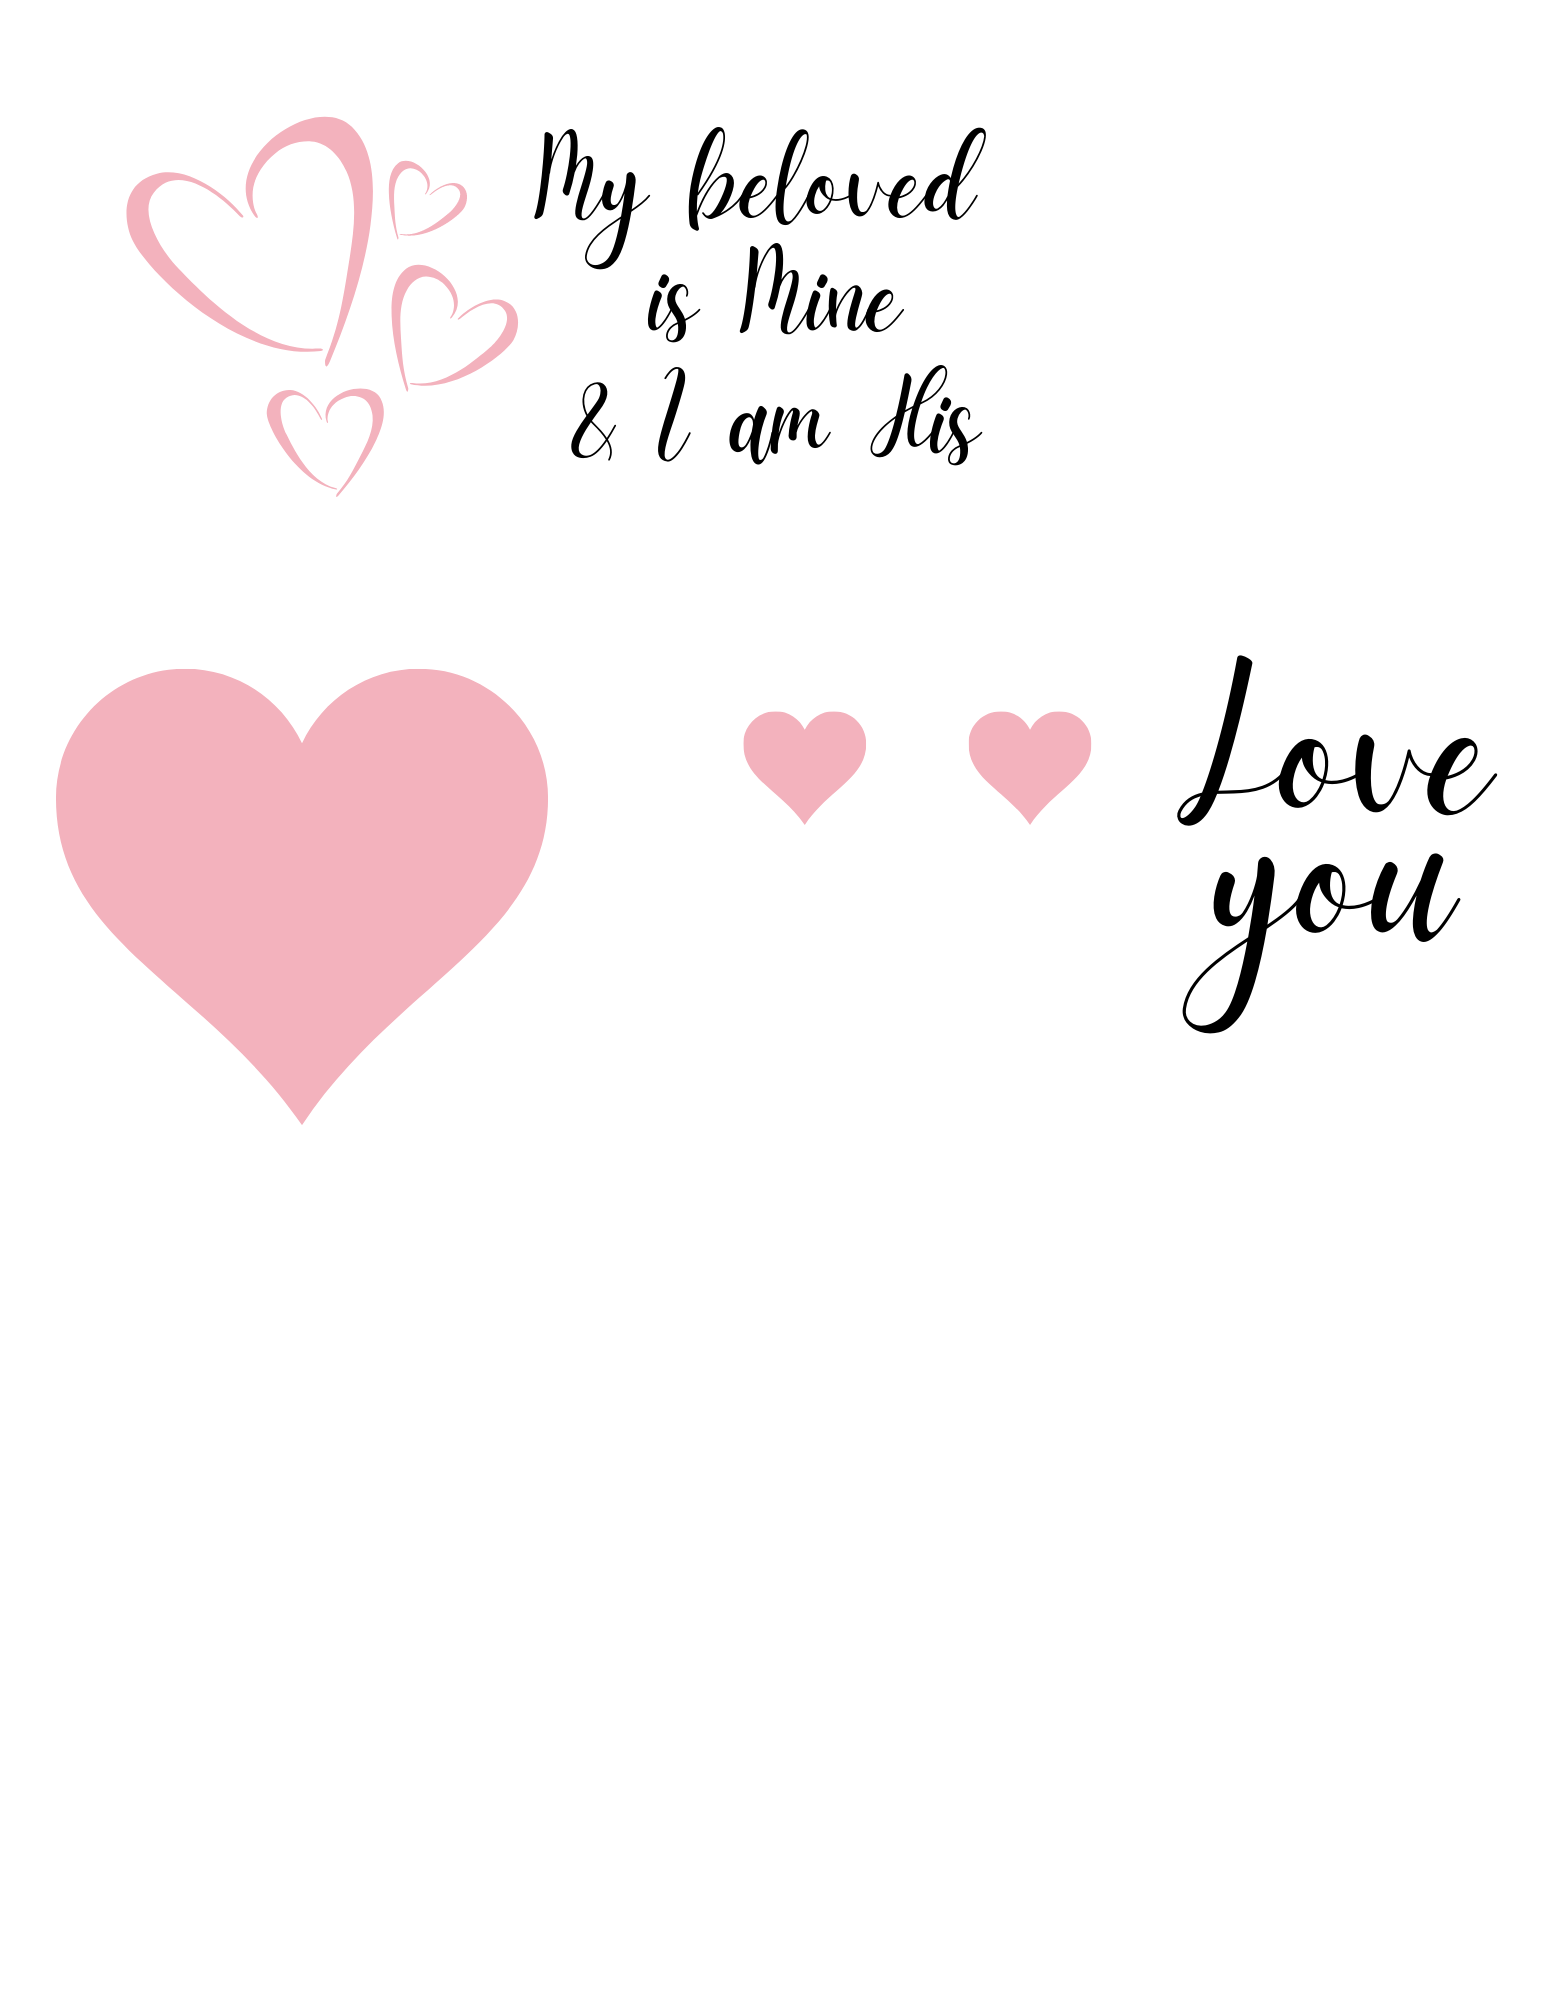 Free design with hearts, "love you," and "My beloved is mine & I am his" to use on the Valentine's decorations.